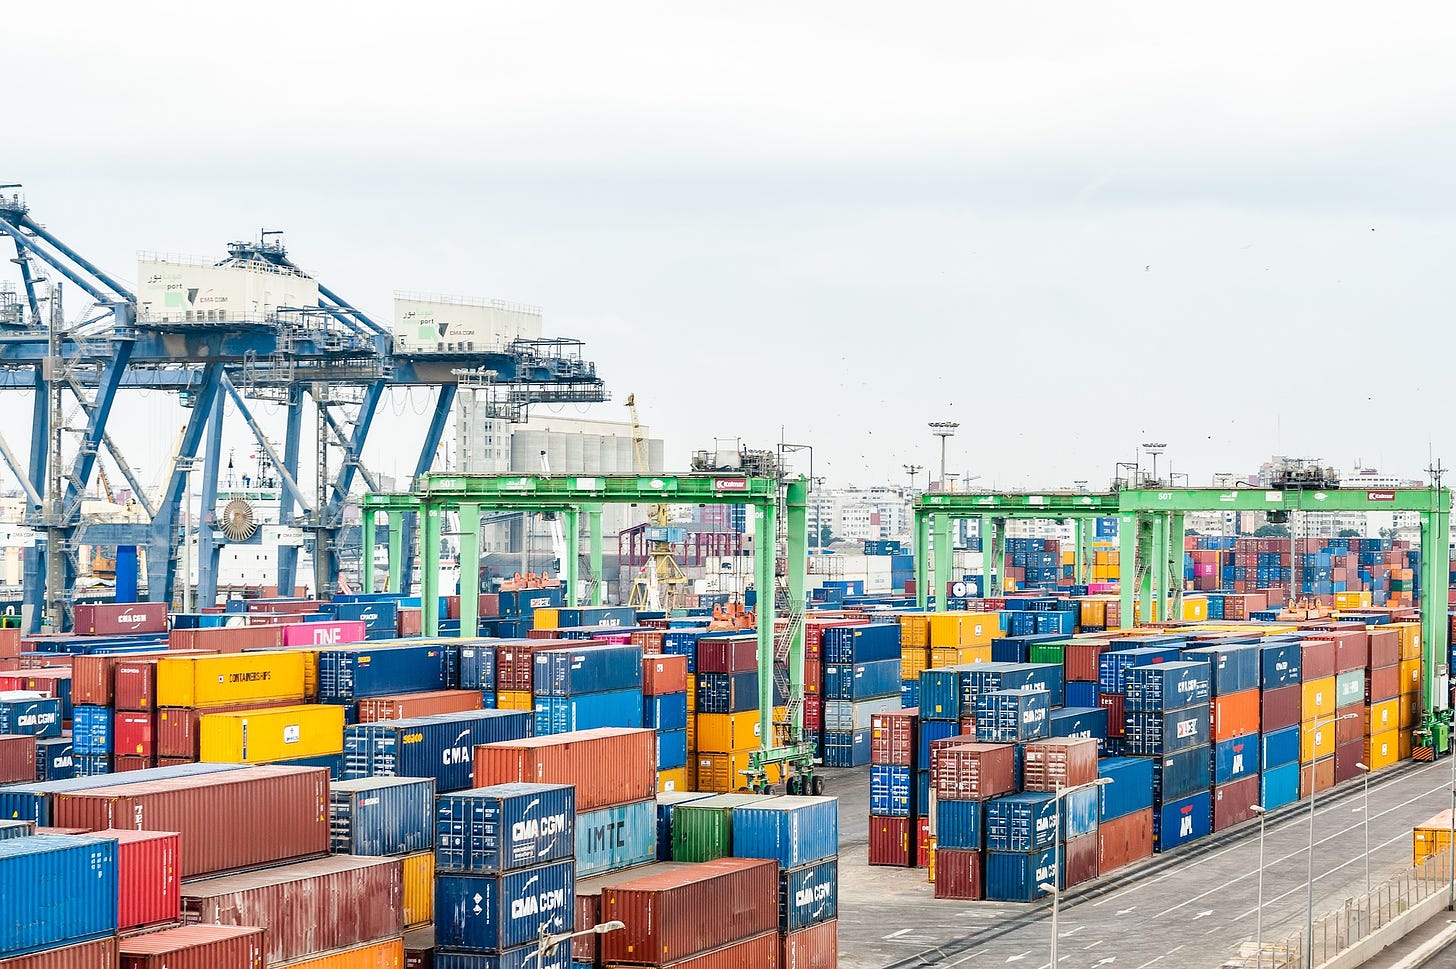 Containers at a port